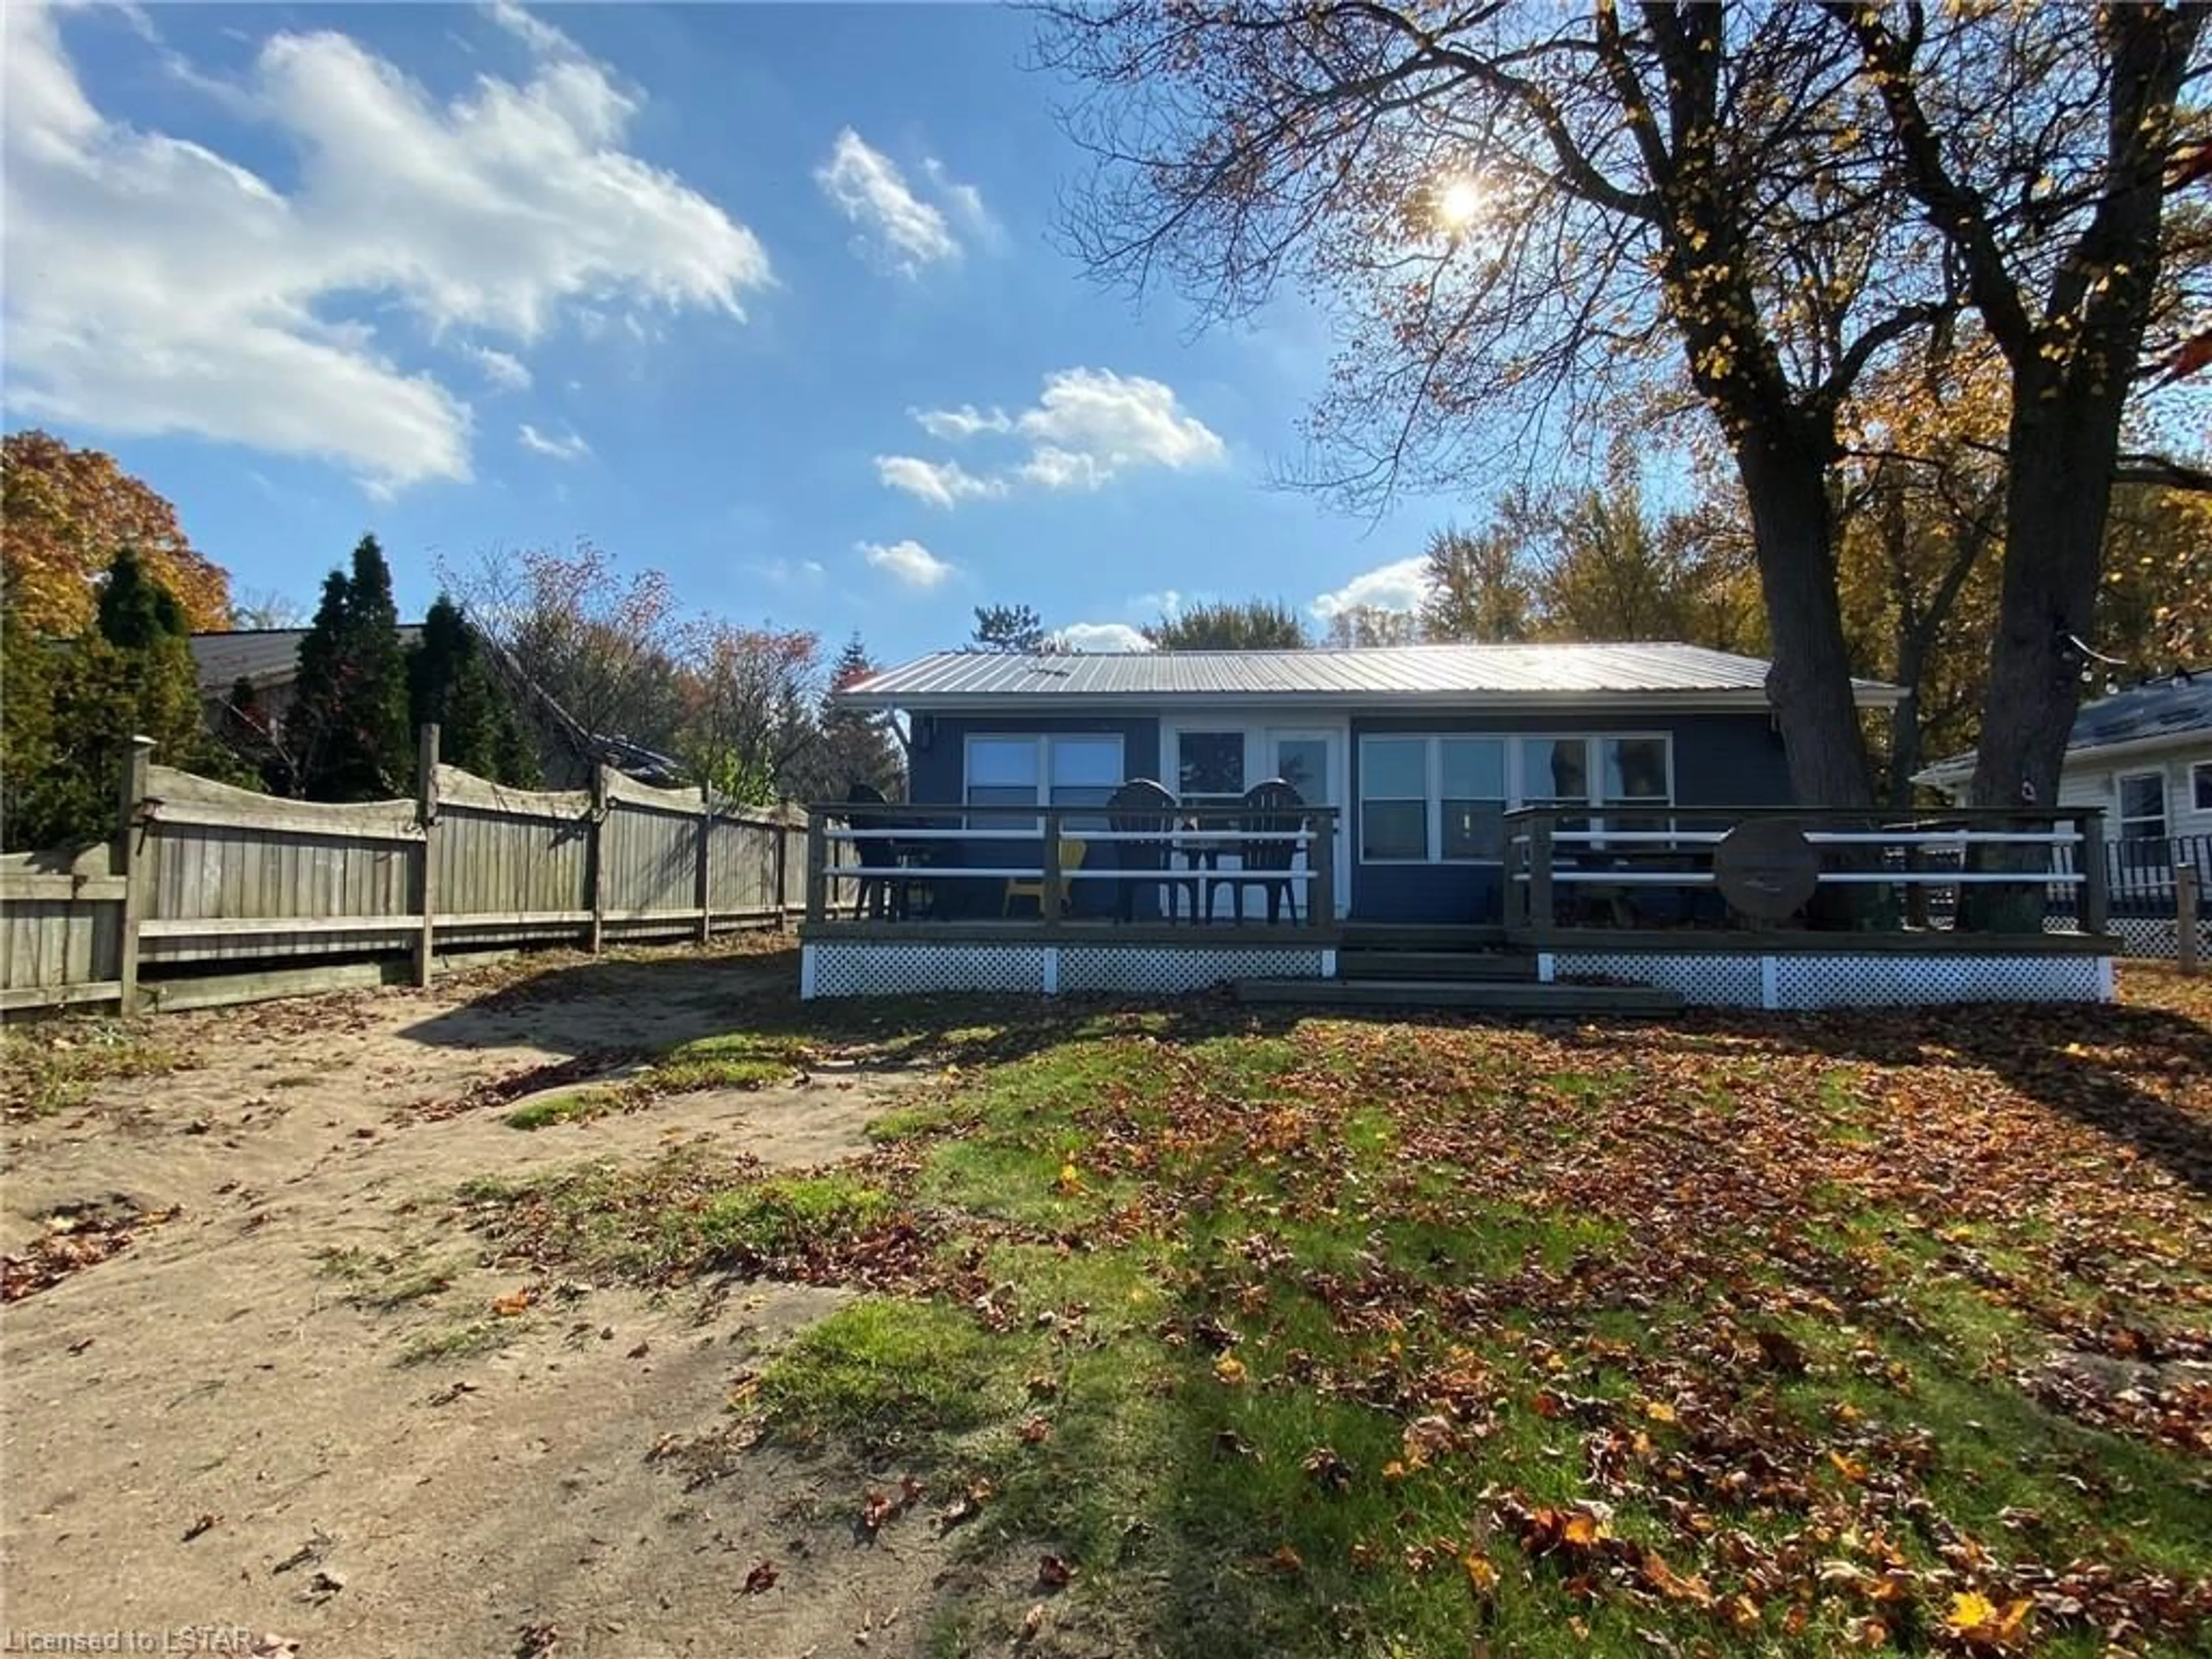 Outside view for 6278 Spruce St St, Ipperwash Ontario N0N 1J2